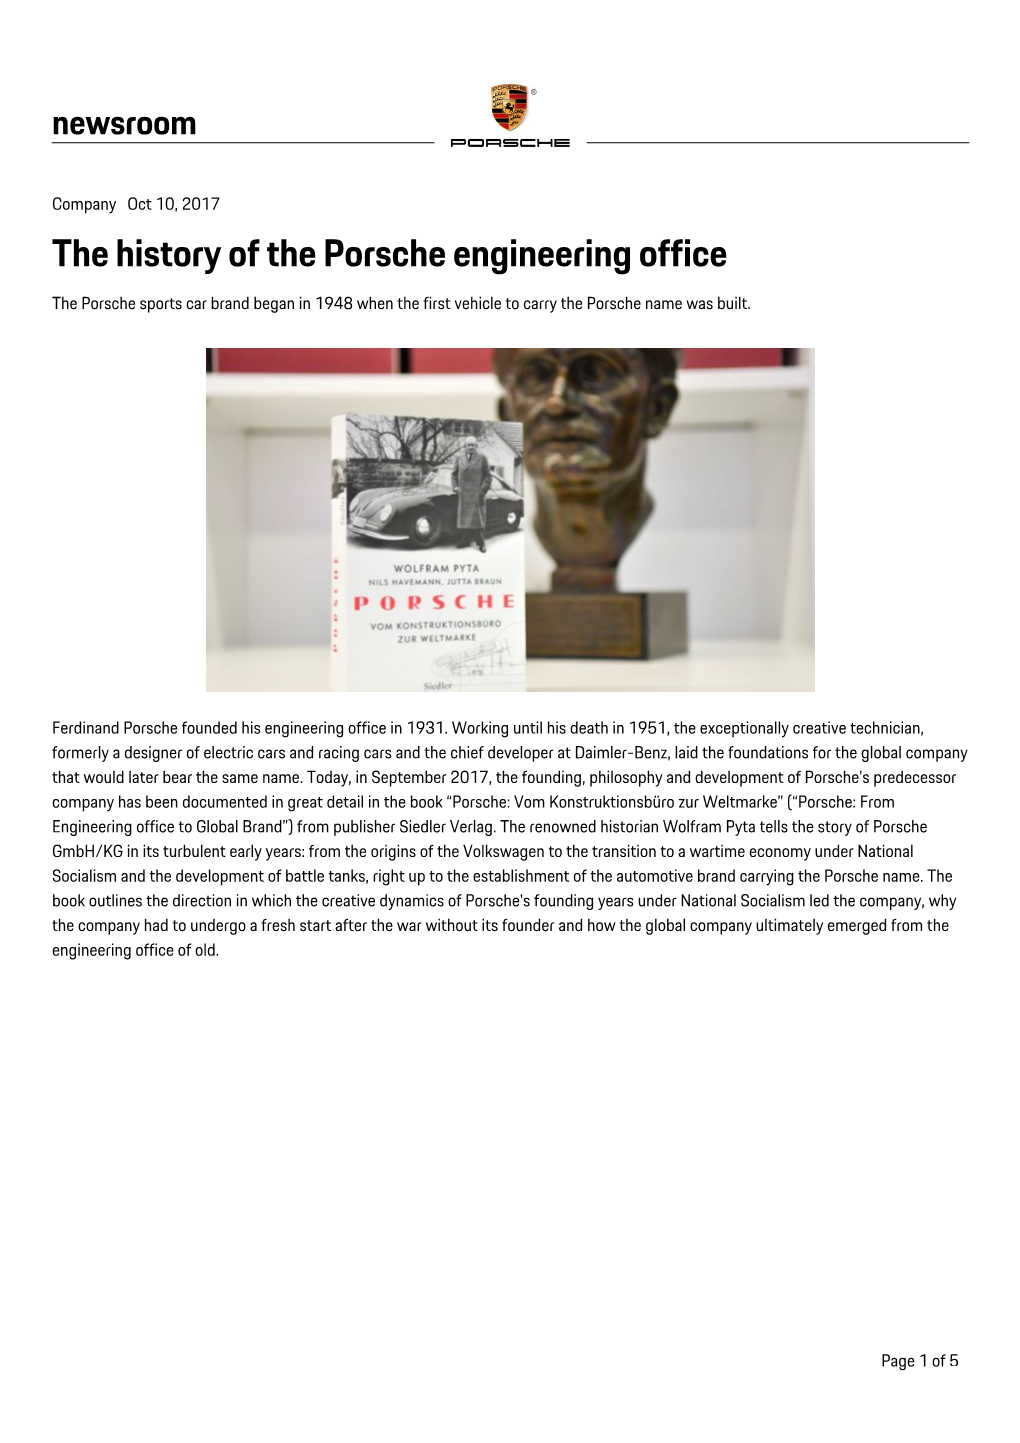 The History of the Porsche Engineering Office the Porsche Sports Car Brand Began in 1948 When the First Vehicle to Carry the Porsche Name Was Built